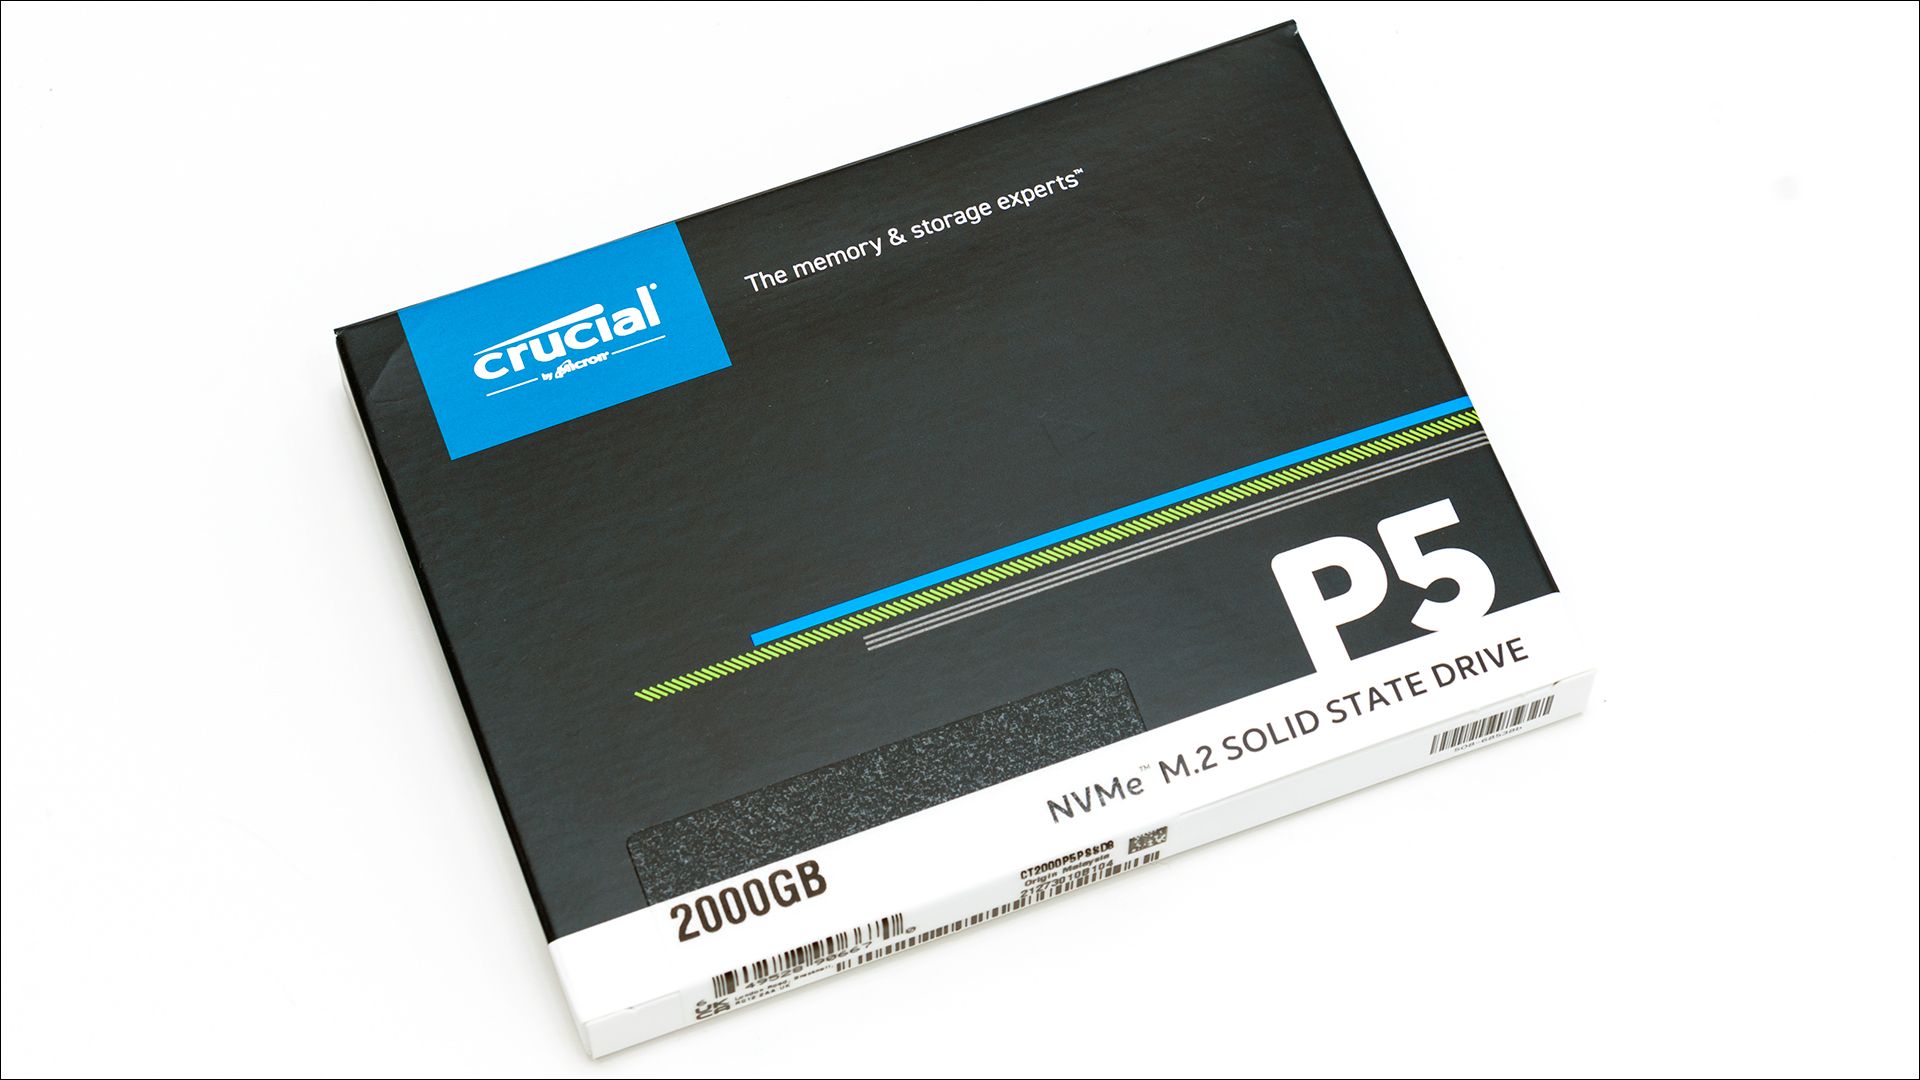 Crucial P5 Plus 2TB Review